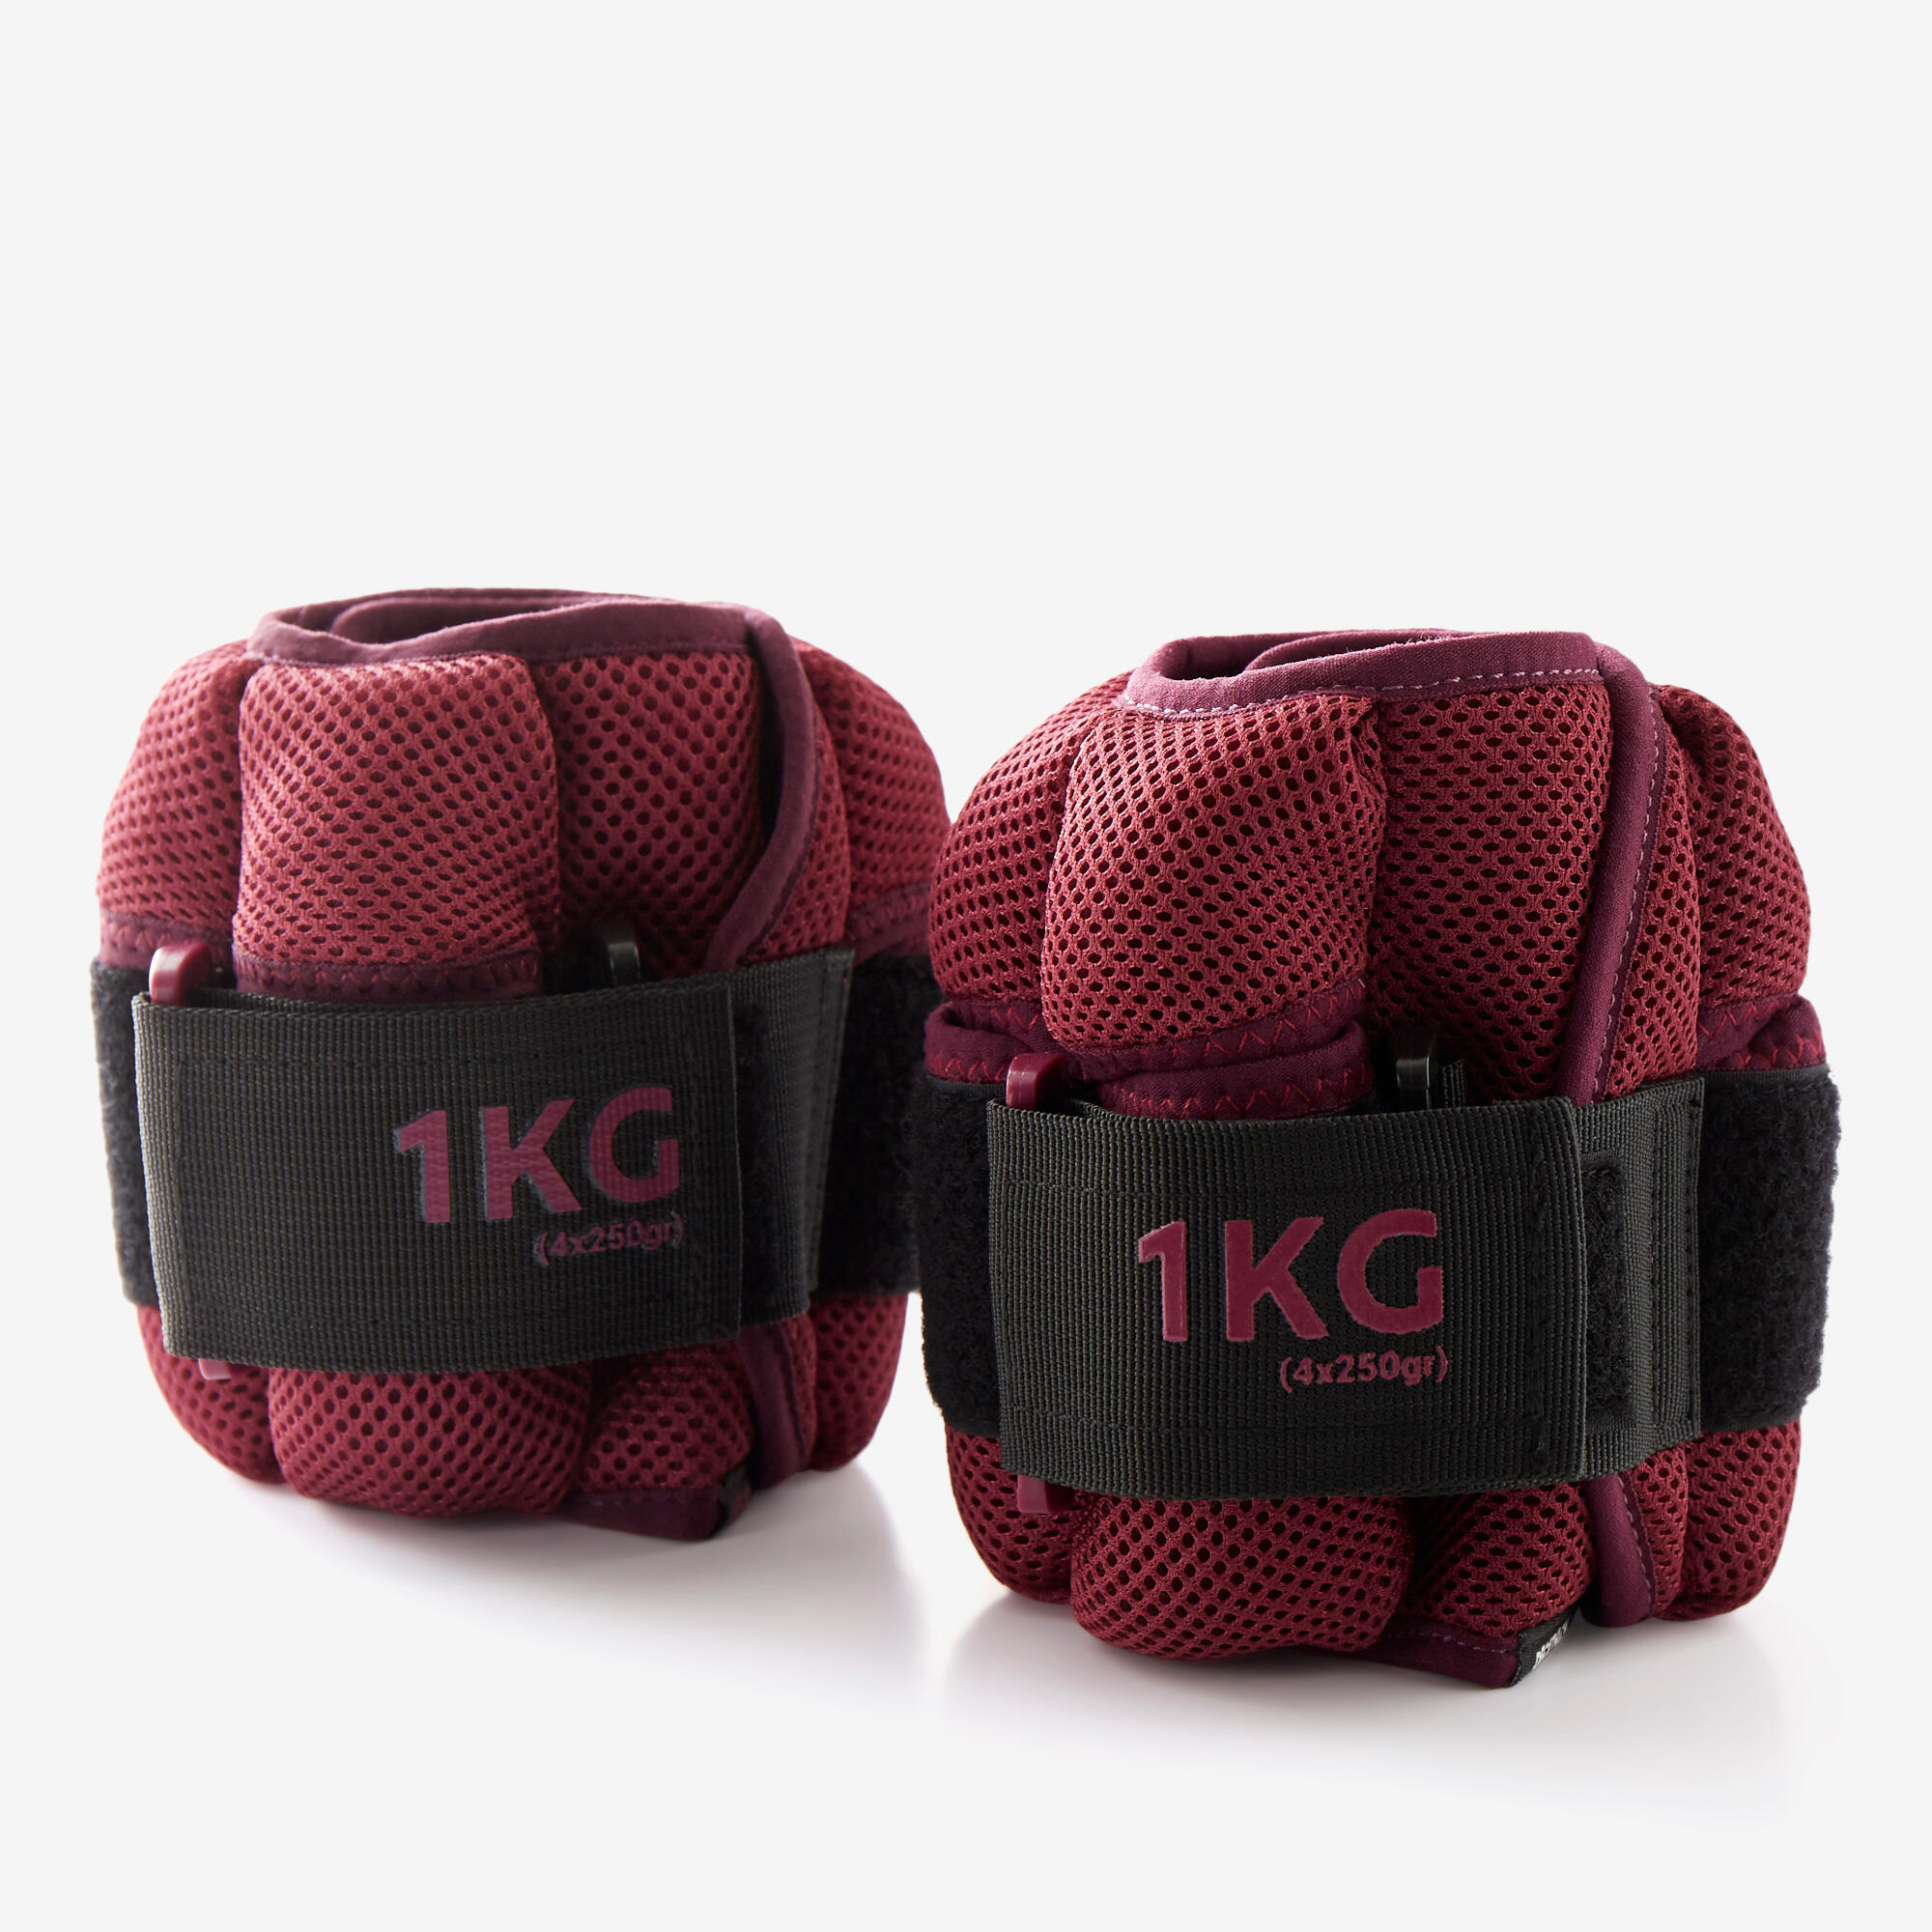 1 kg Adjustable Wrist / Ankle Weights Twin-Pack - Burgundy 1/5